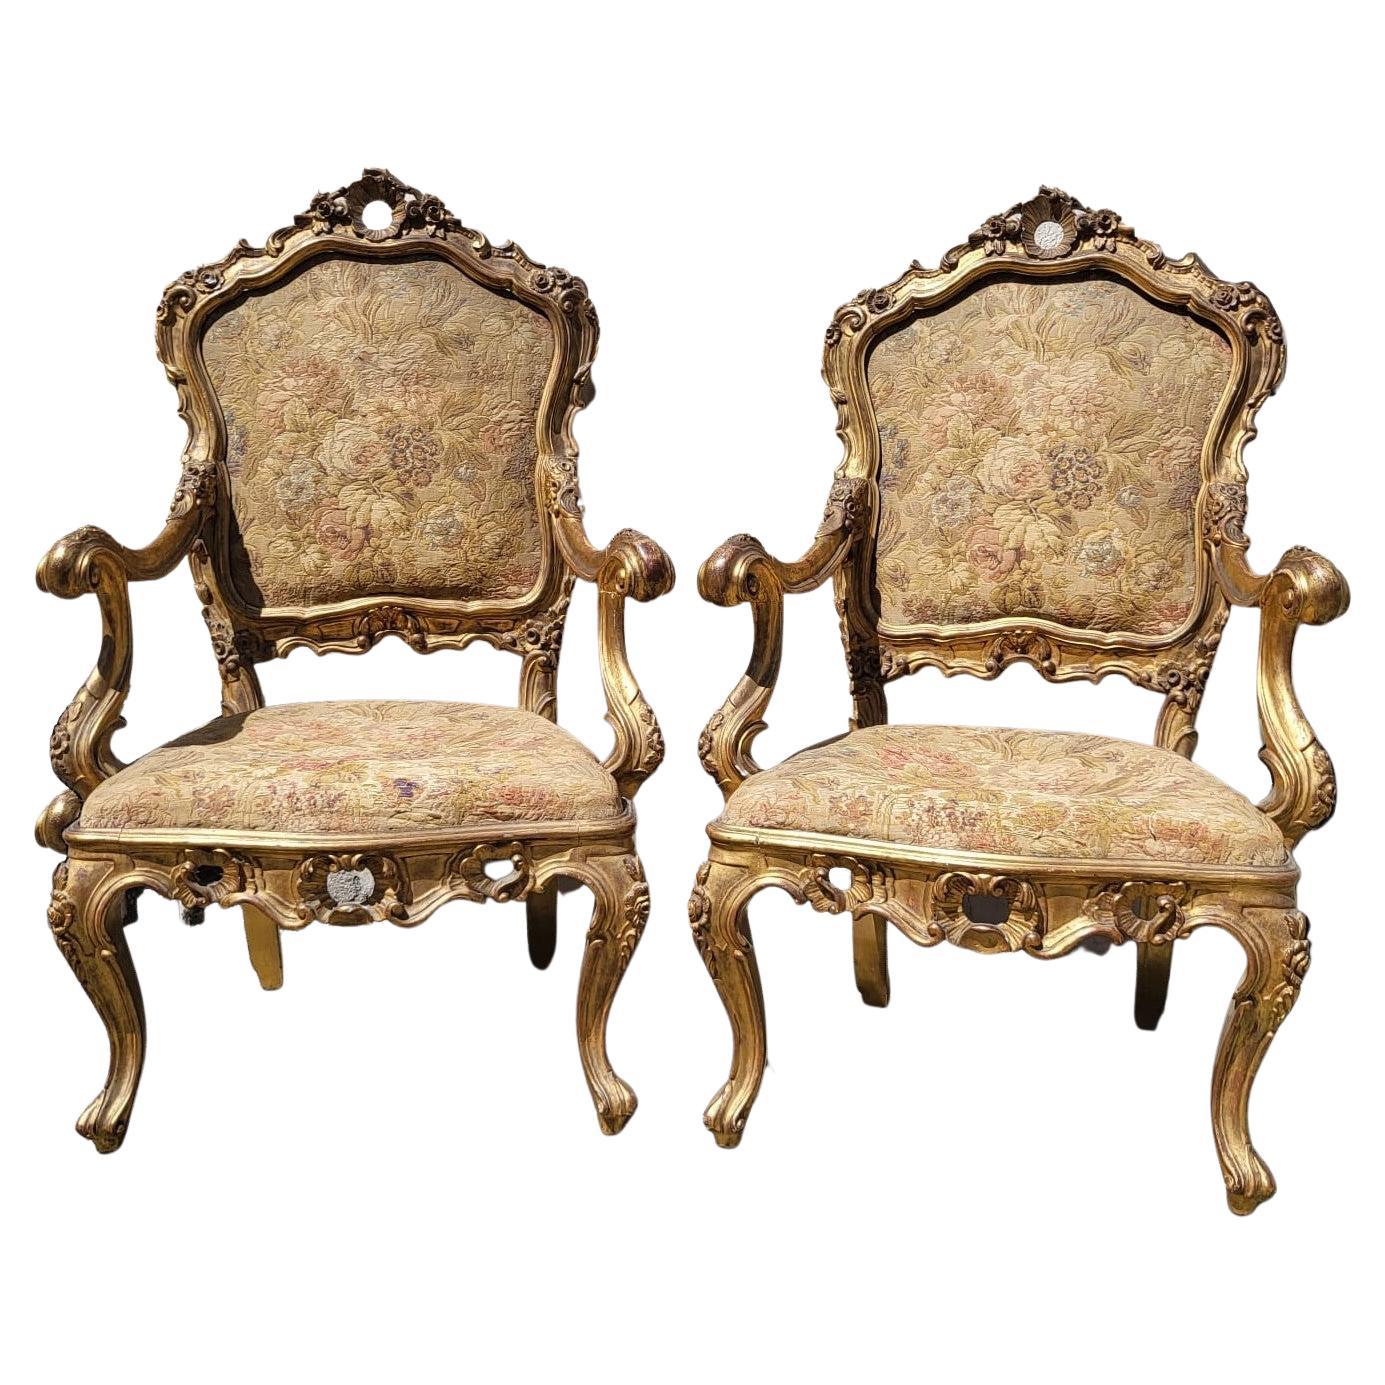 Louis XV black armchair and gilded wood - Louis XV armchairs